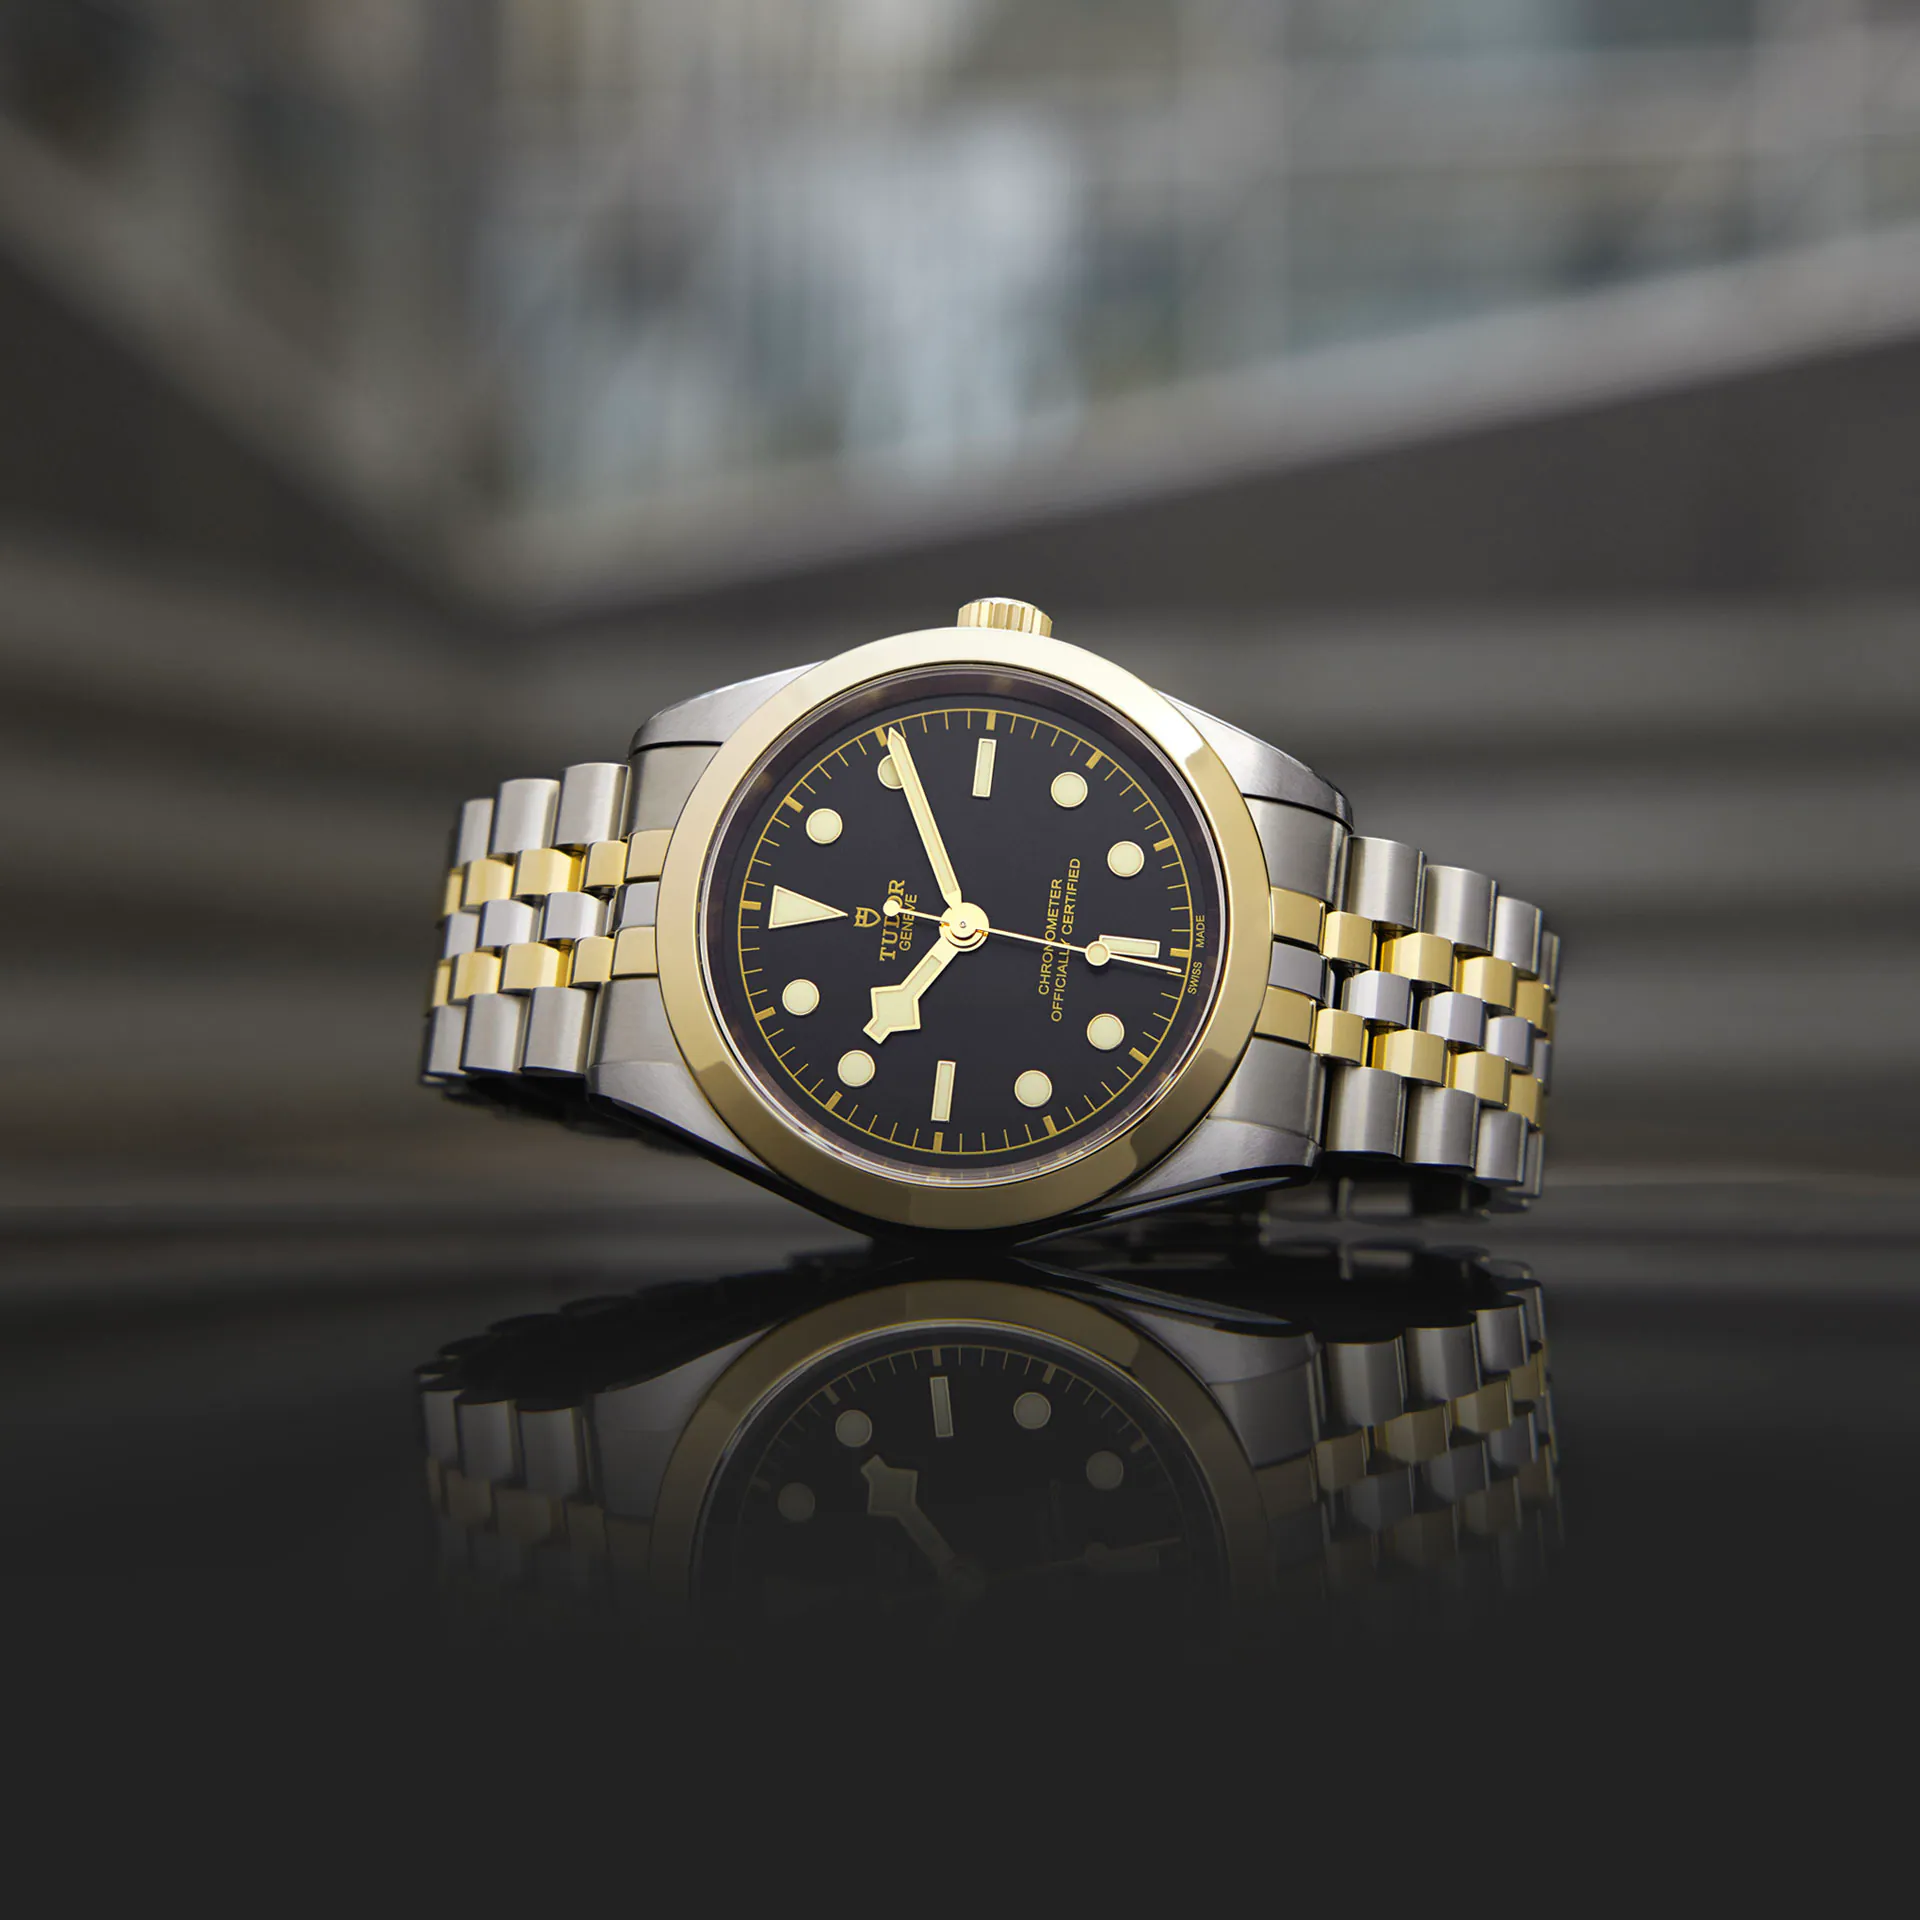 Tudor Black Bay 39 S&G, 316L Stainless Steel and 18k Yellow Gold, Ref# M79663-0001, main view